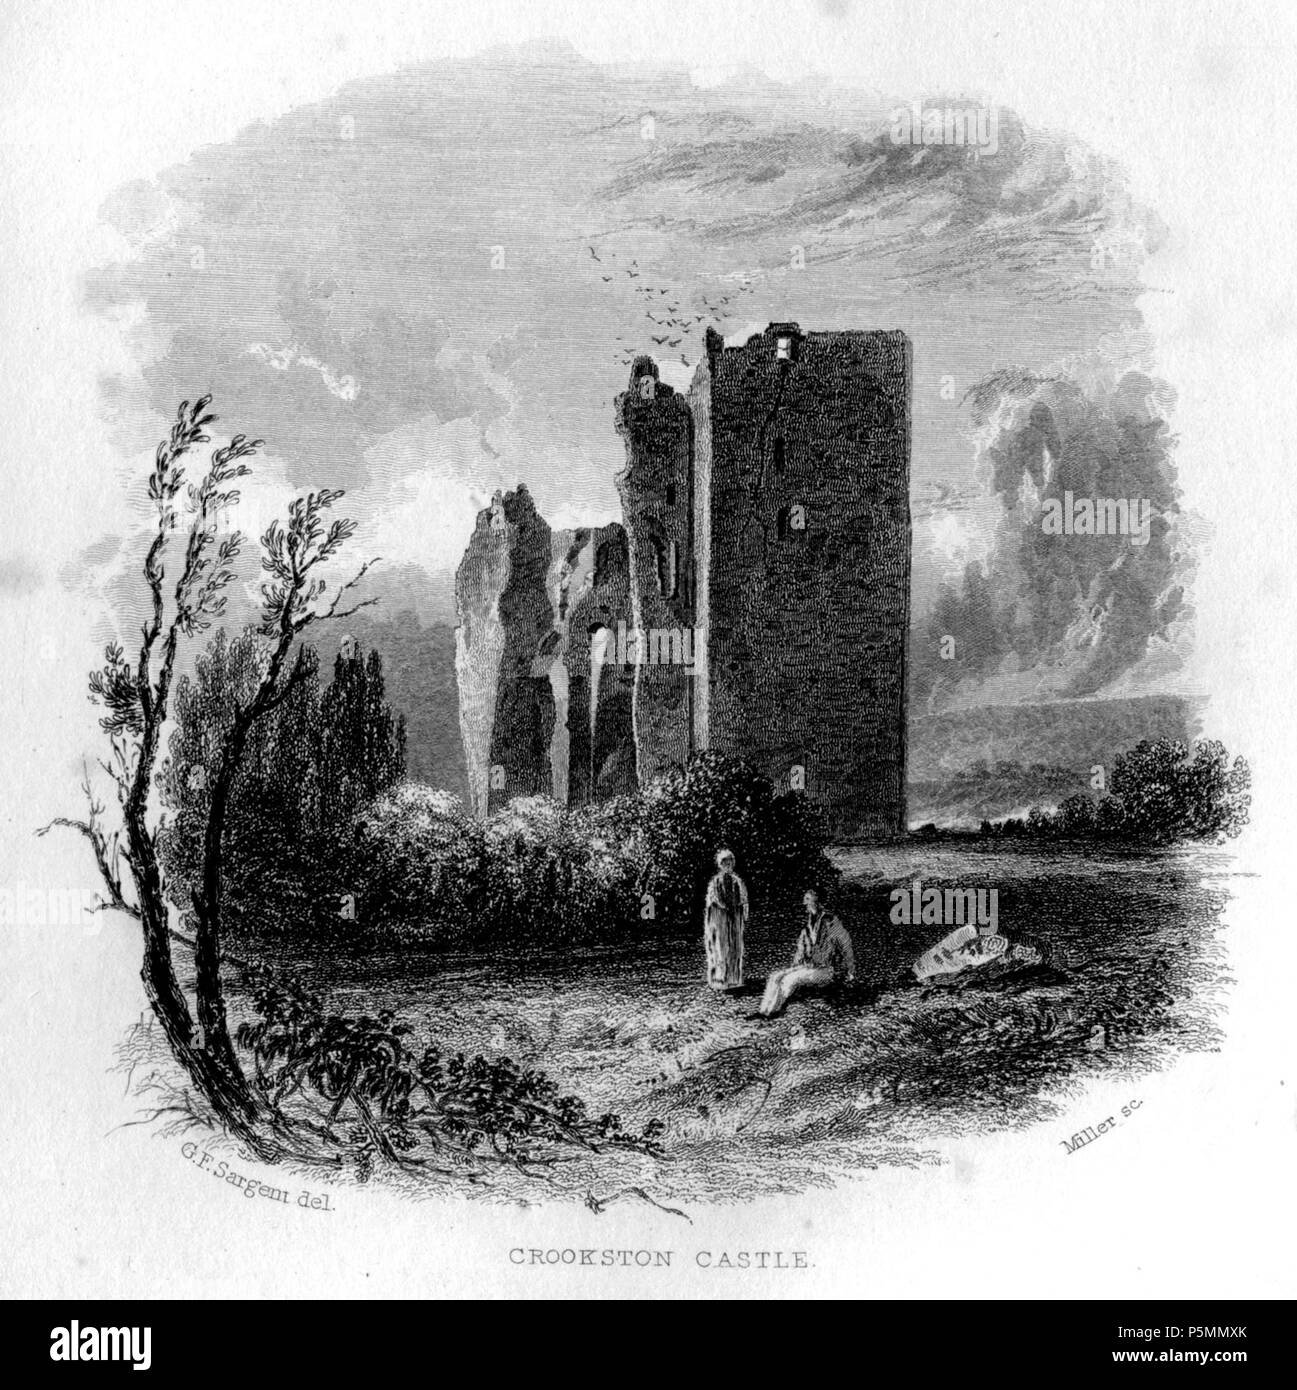 N/A. Crookston Castle vignette engraving by William Miller after G F Sargent (Miller paid £5-5-0 in ii 1832 for engraving), published in The Castles, Palaces and Prisons of Mary of Scotland. Charles Mackie. London. C Cox, 12, King William St, Strand, Oliver & Boyd Edinburgh, David Robertson, Bookseller to the Queen Glasgow, James Chalmers Dundee, & J Robertson Dublin. 1849 . 1832.   William Miller  (1796–1882)     Alternative names William Frederick I Miller; William Frederick, I Miller  Description Scottish engraver  Date of birth/death 28 May 1796 20 January 1882  Location of birth/death Edi Stock Photo